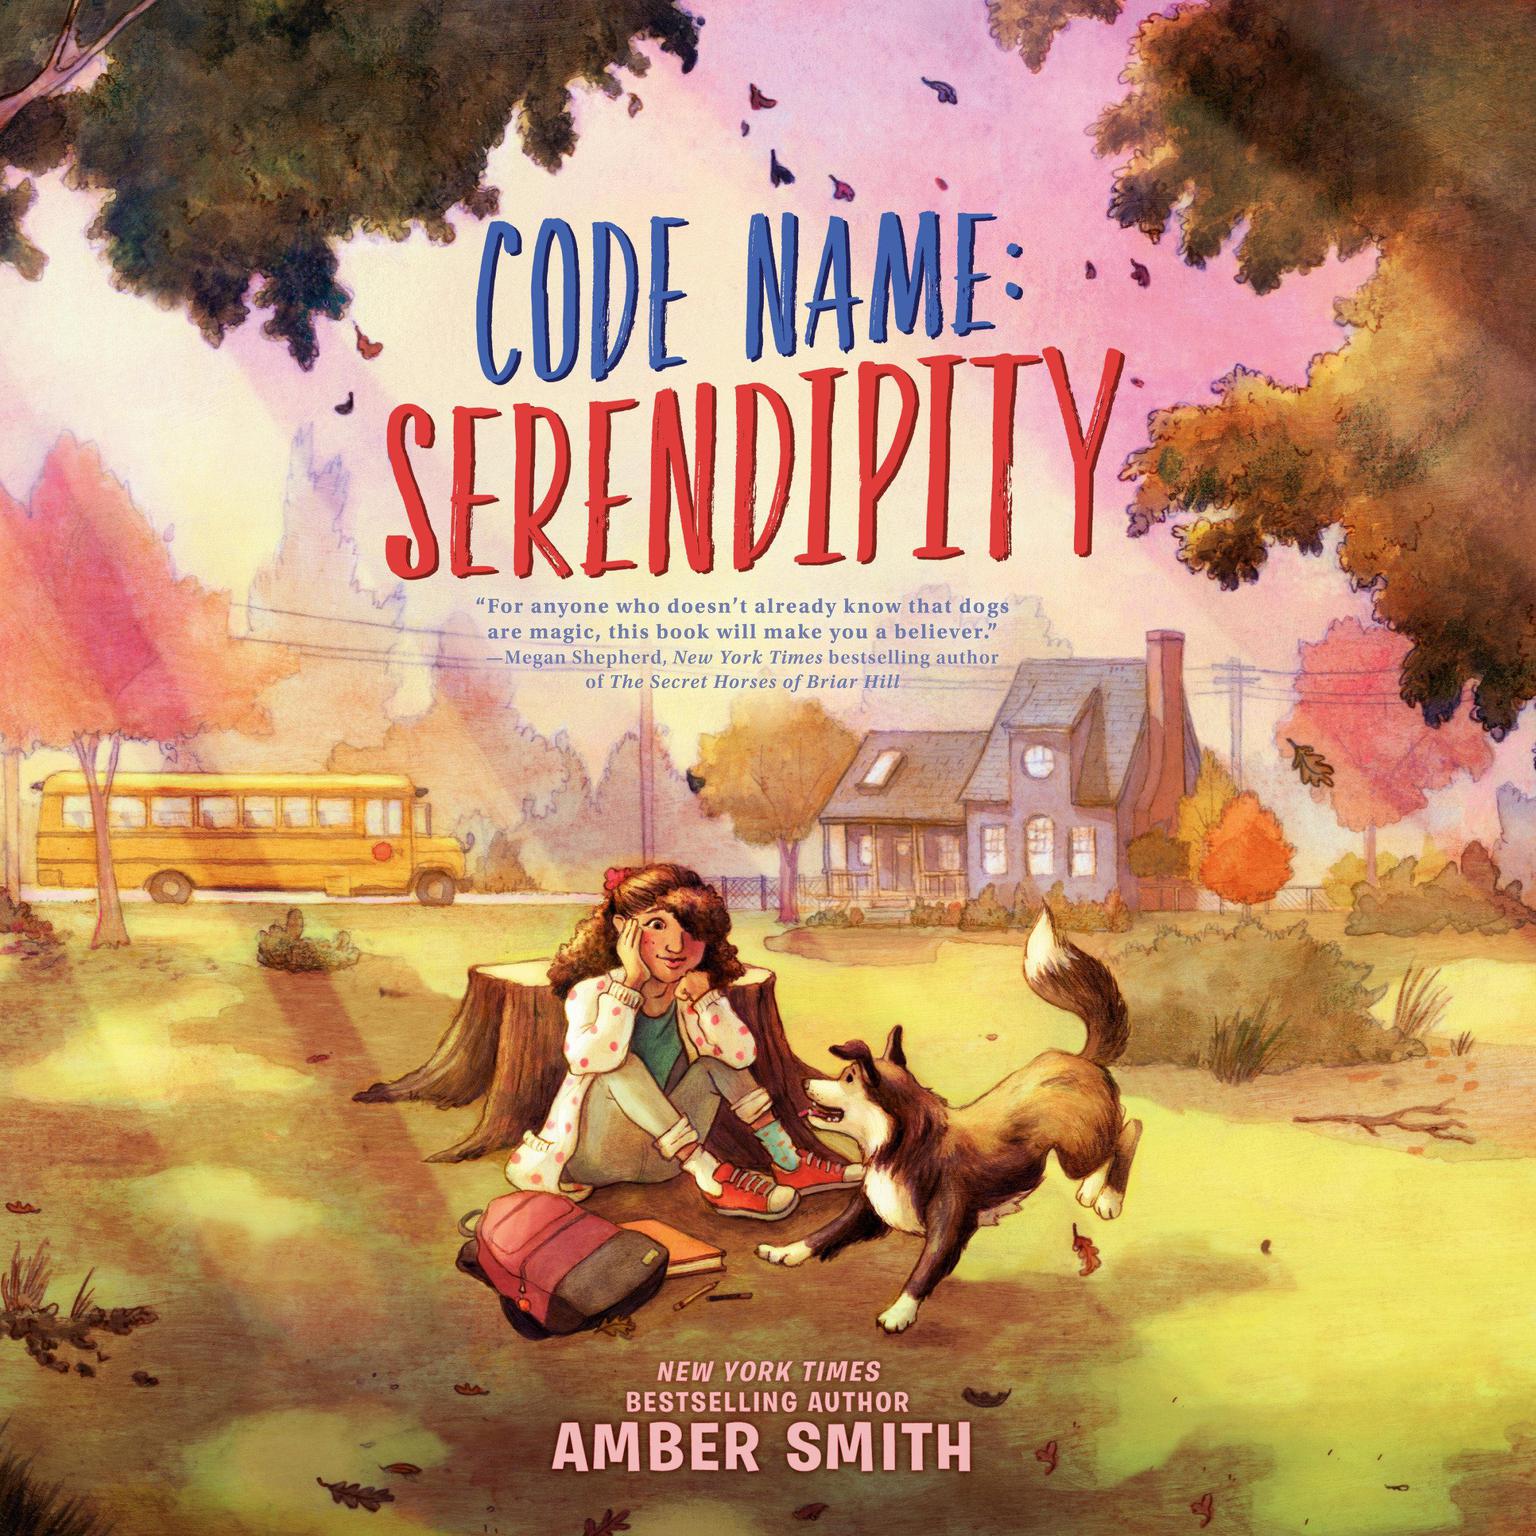 Code Name: Serendipity Audiobook, by Amber Smith